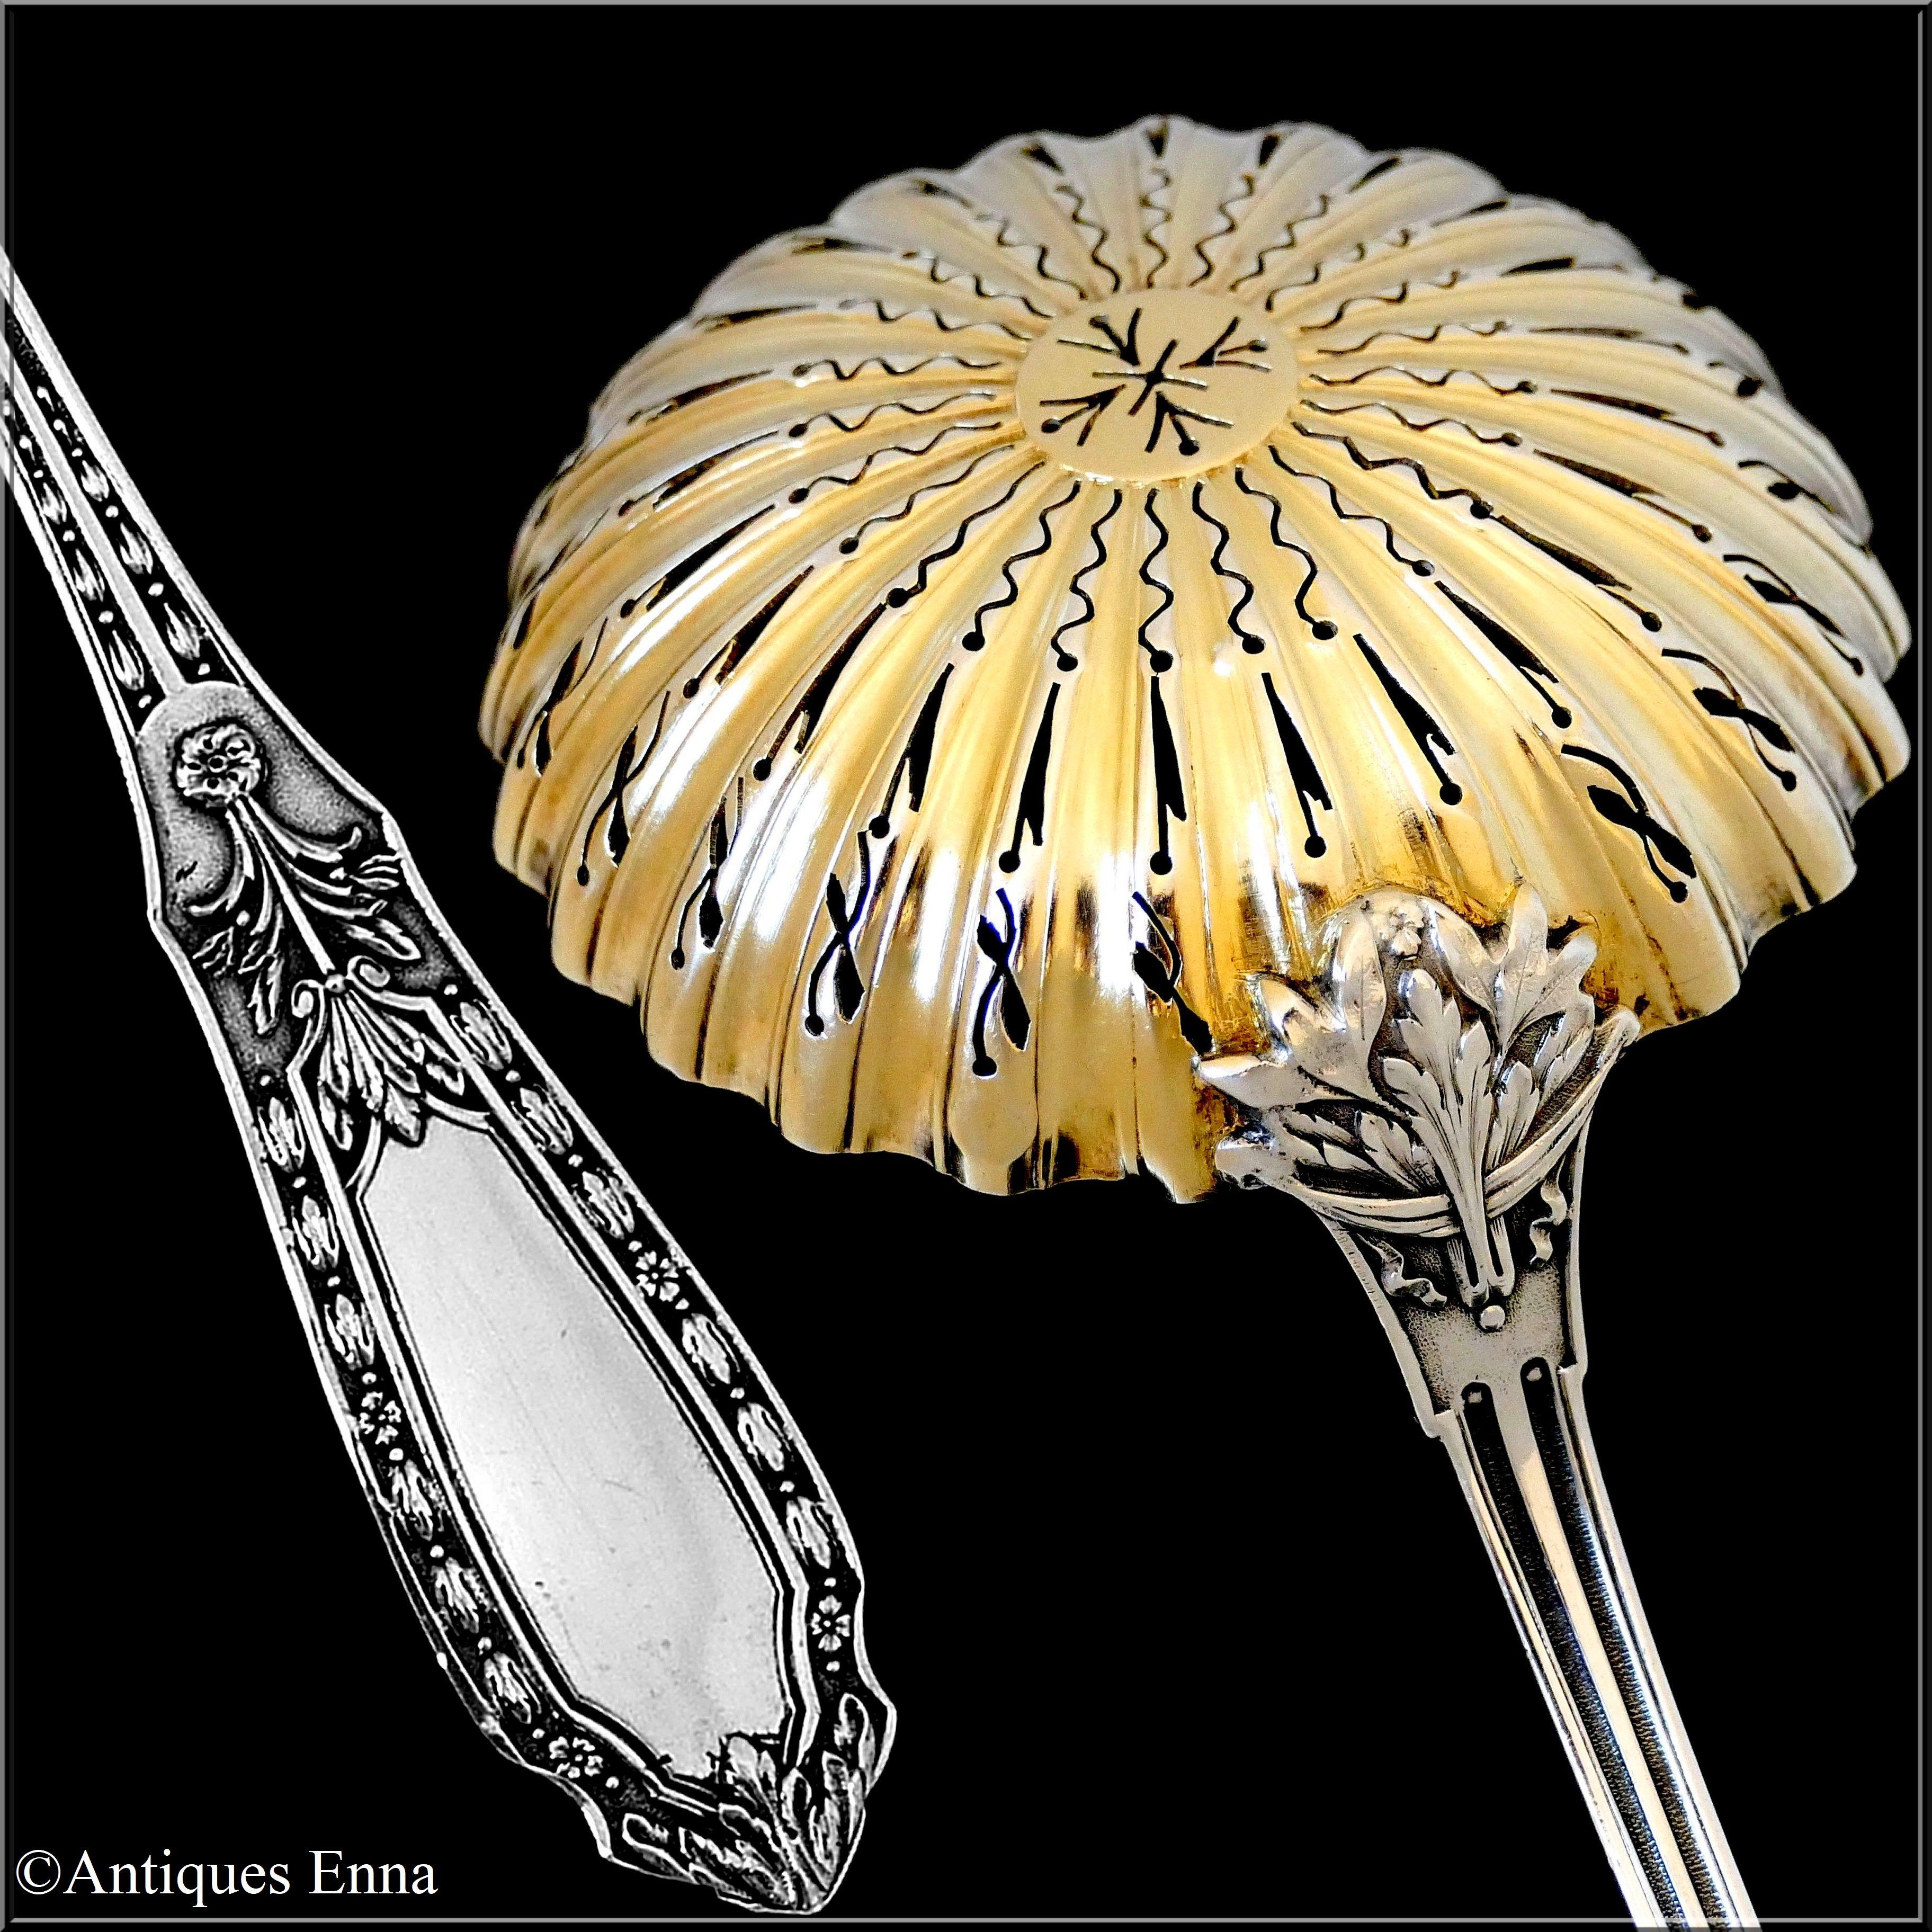 Circular pierced bowl with 18-karat gold finishing, stem and handle with stylized foliate decoration in the manner of Louis XIV, Renaissance. No monograms.

Head of Minerve 1st titre for 950/1000 French sterling silver guarantee. The quality of